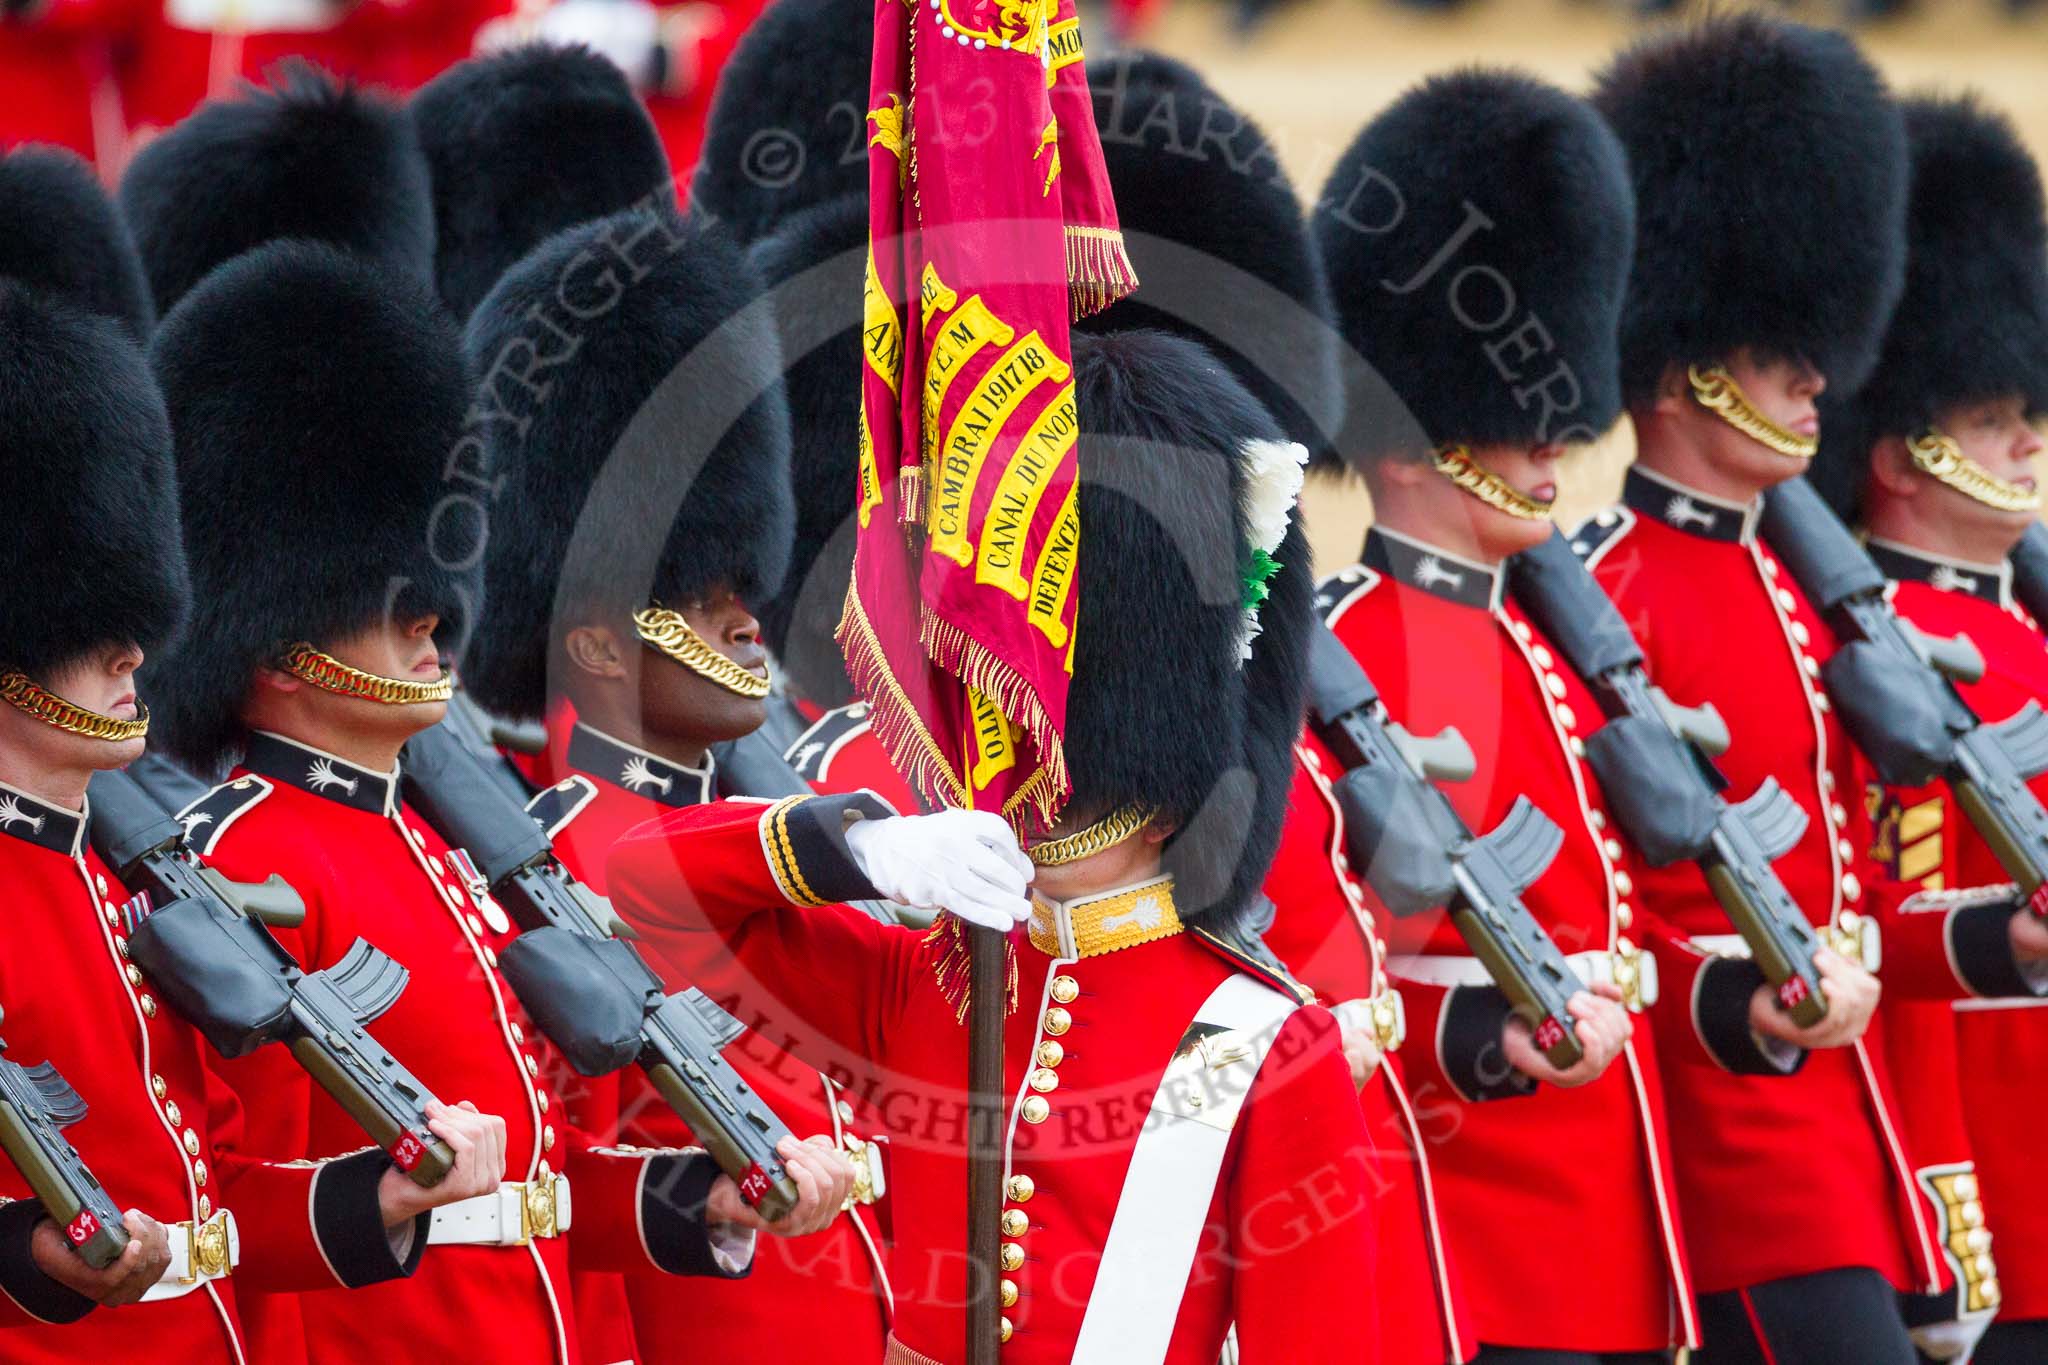 Trooping the Colour 2015. Image #448, 13 June 2015 11:34 Horse Guards Parade, London, UK